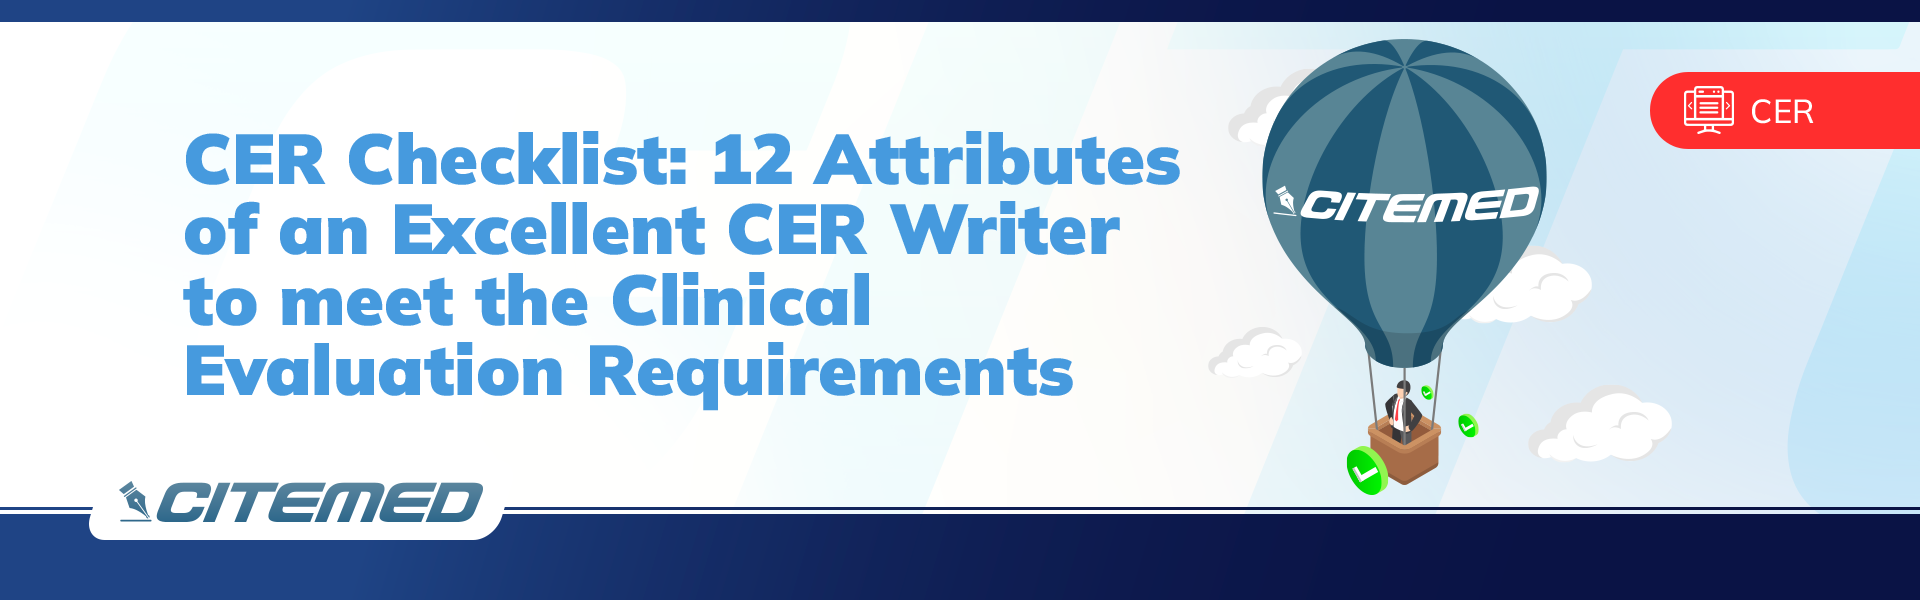 CER Checklist: 12 Attributes of an Excellent CER Writer to meet the Clinical Evaluation Requirements